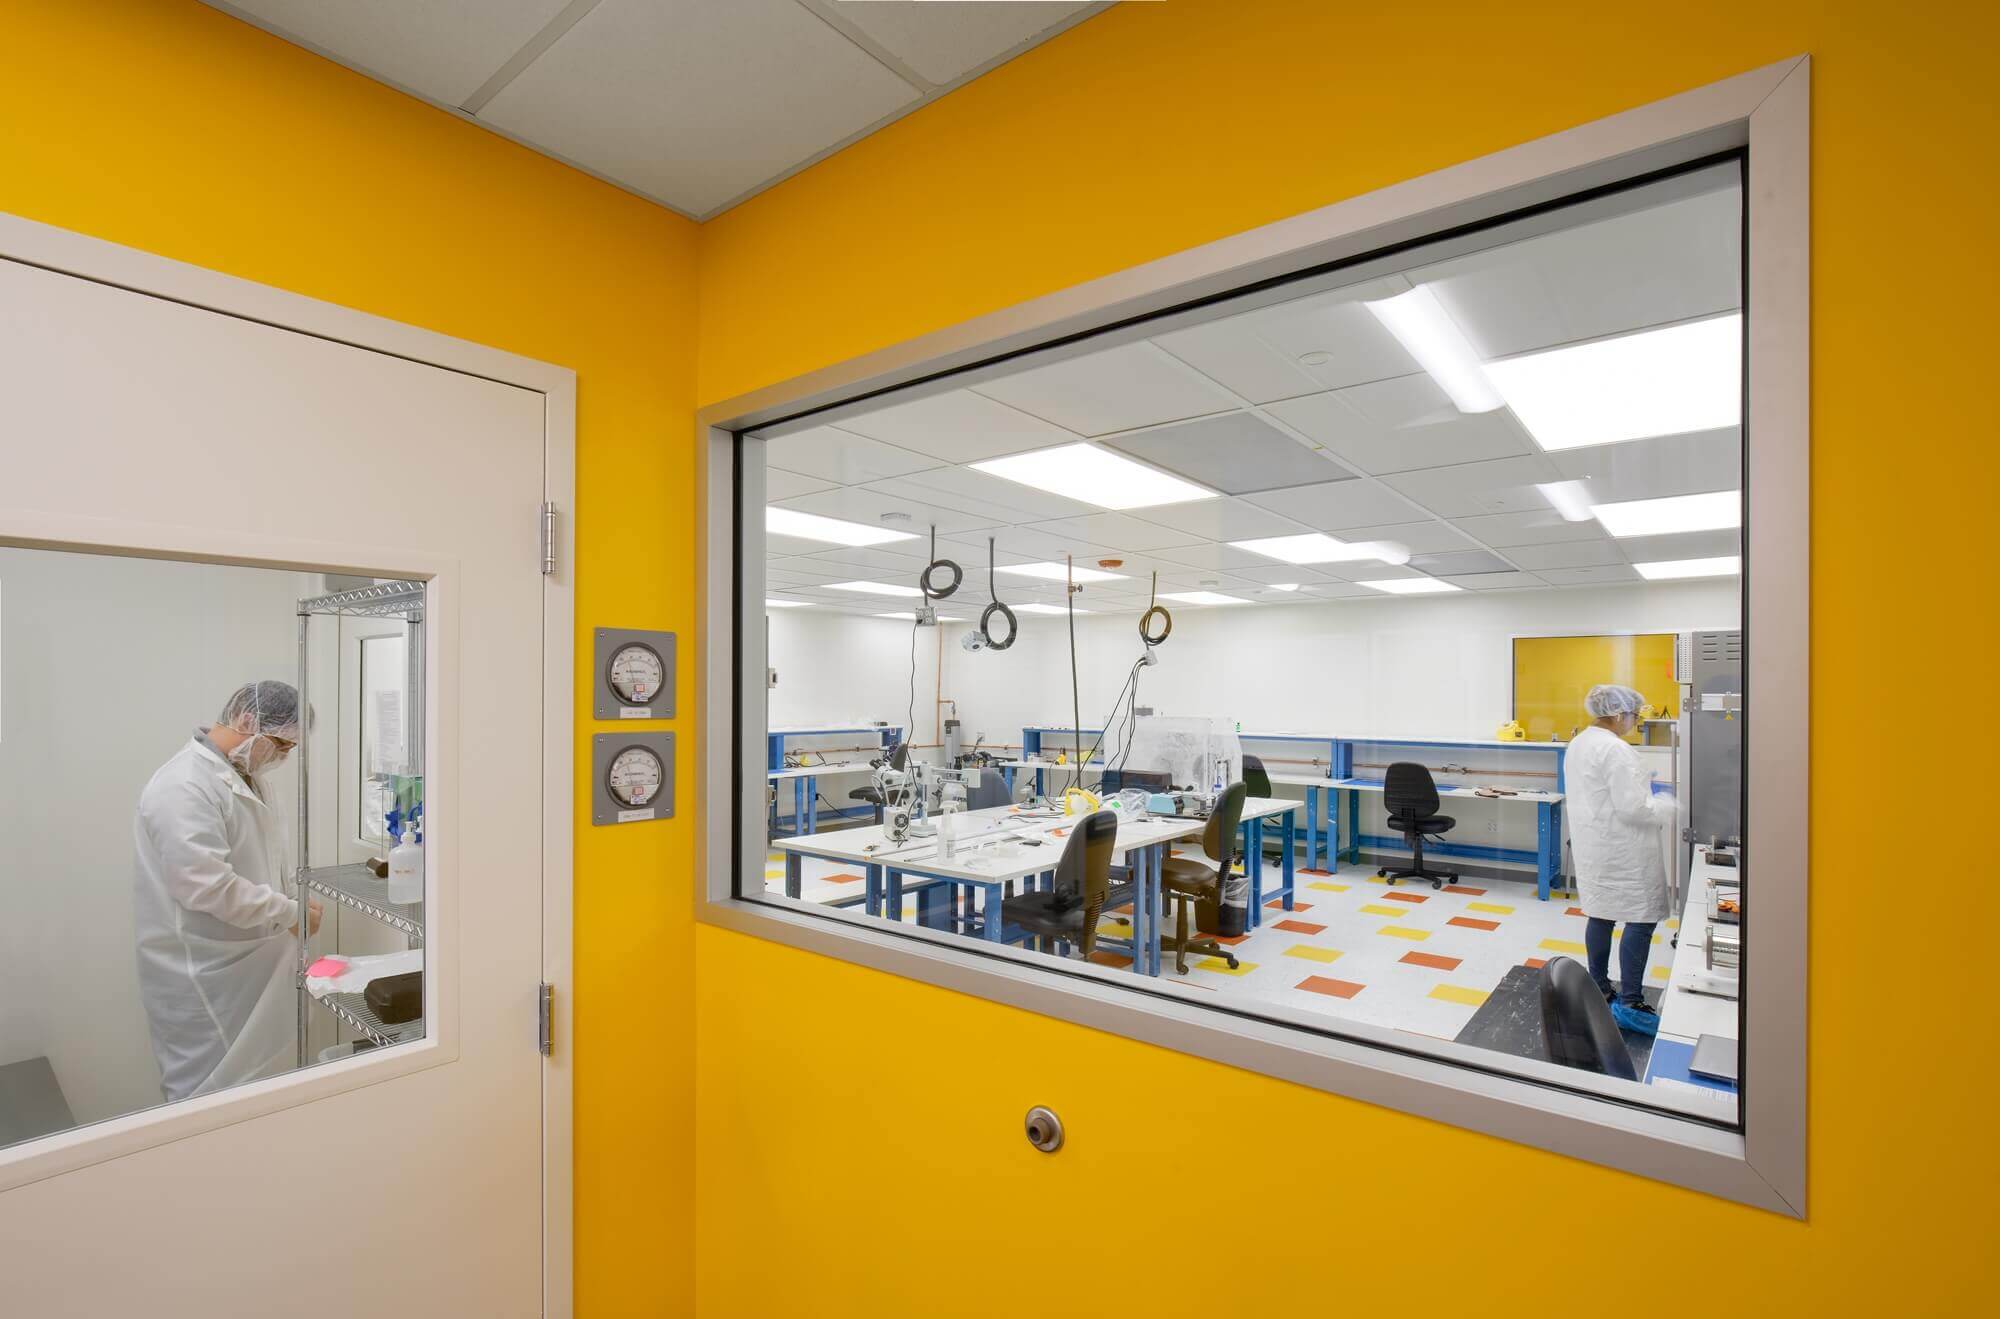 Neptune Medical facility renovation - yellow colored wall with large glass window